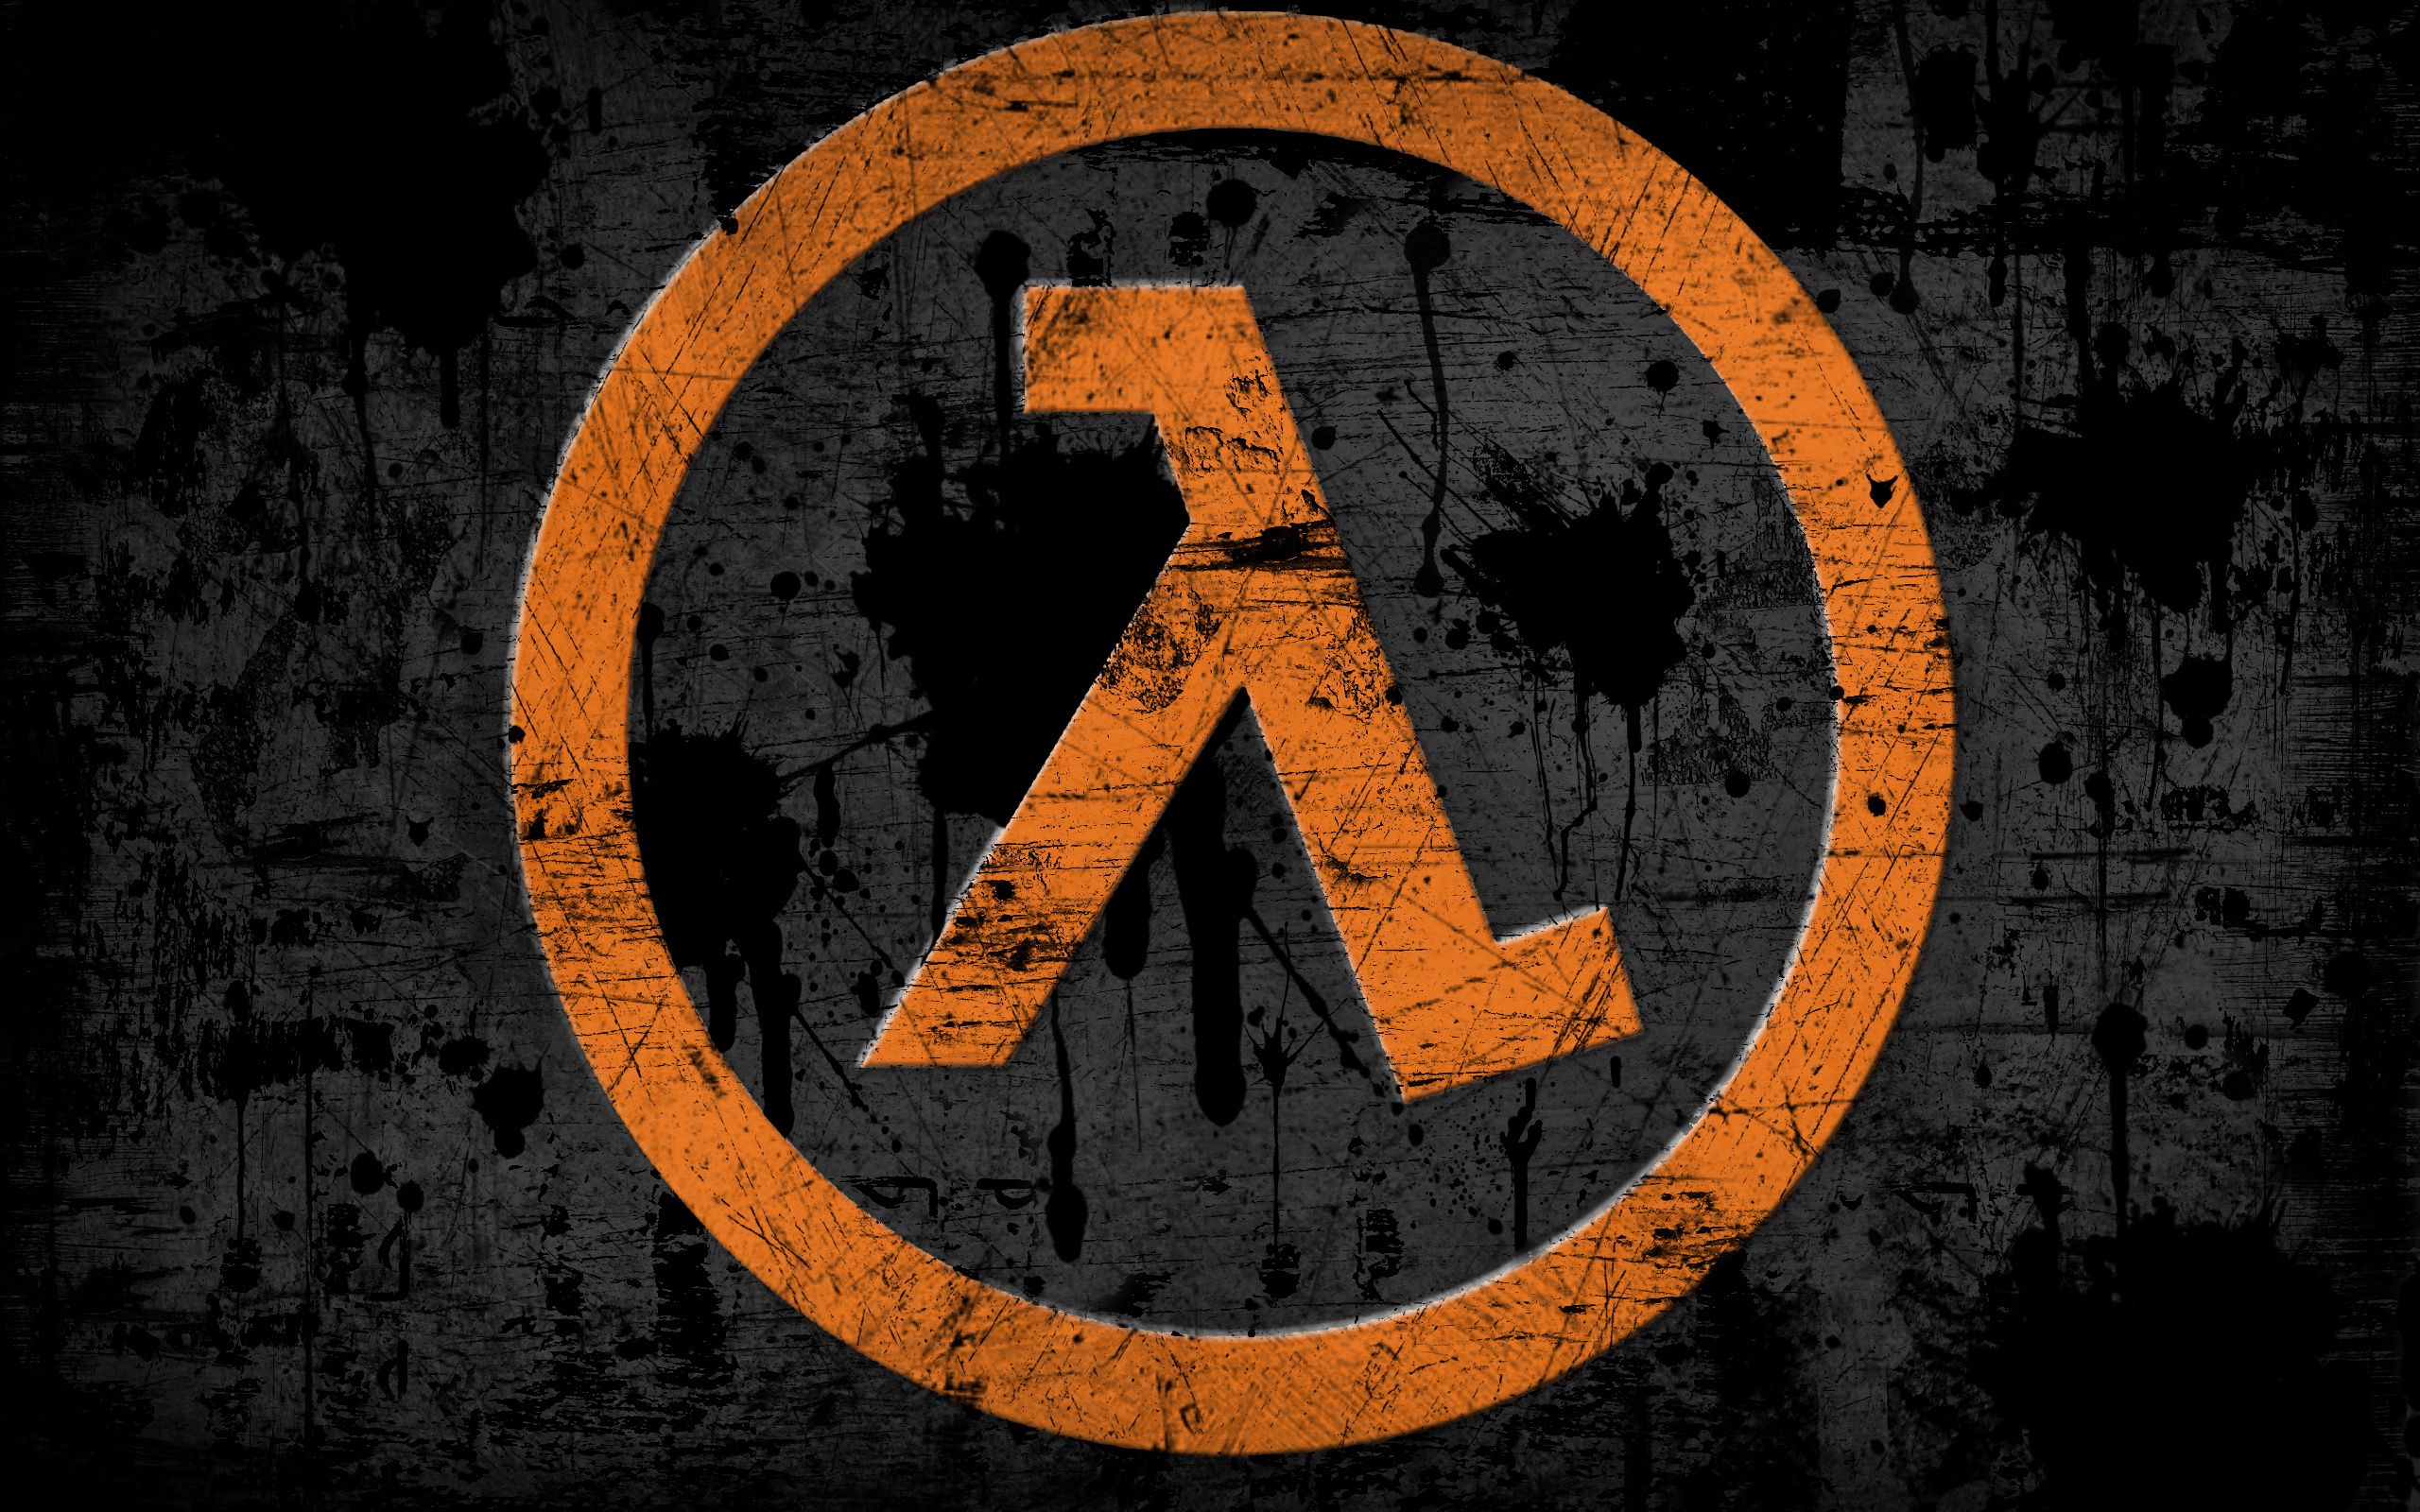 Half Life games free on Steam limited trial